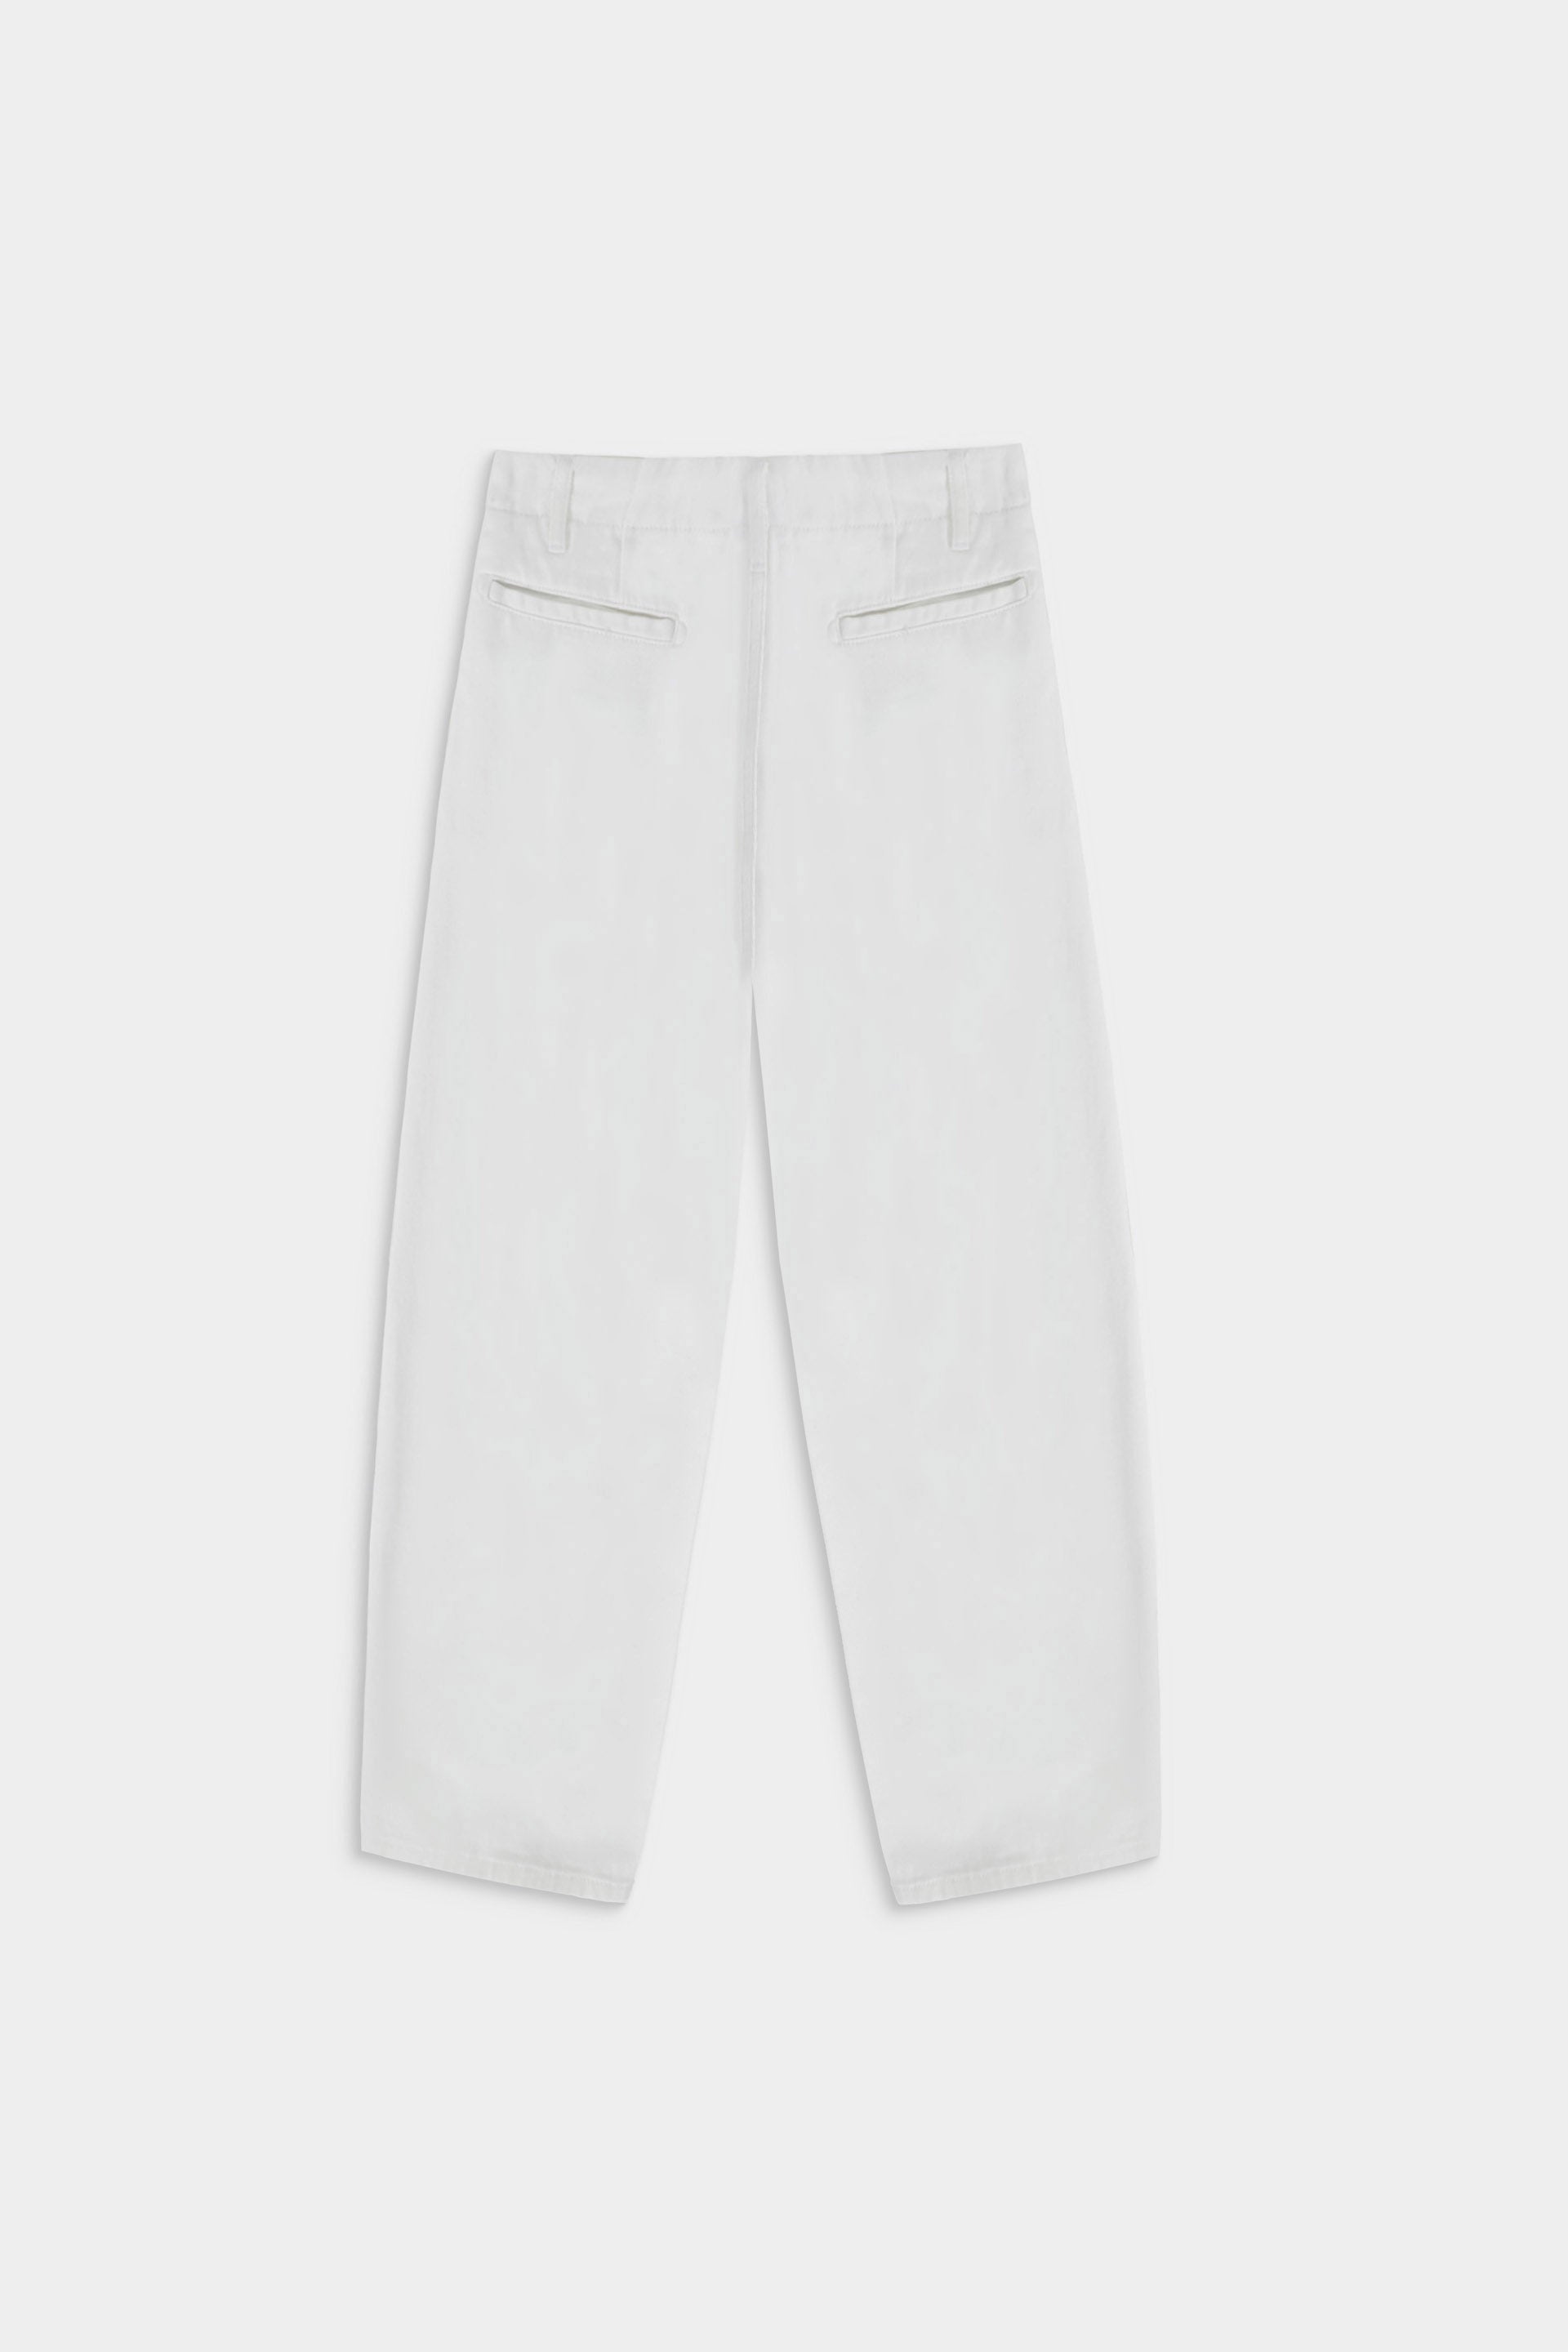 ASOS DESIGN balloon fit pants in diagonal cut cord in pink - ShopStyle  Chinos & Khakis